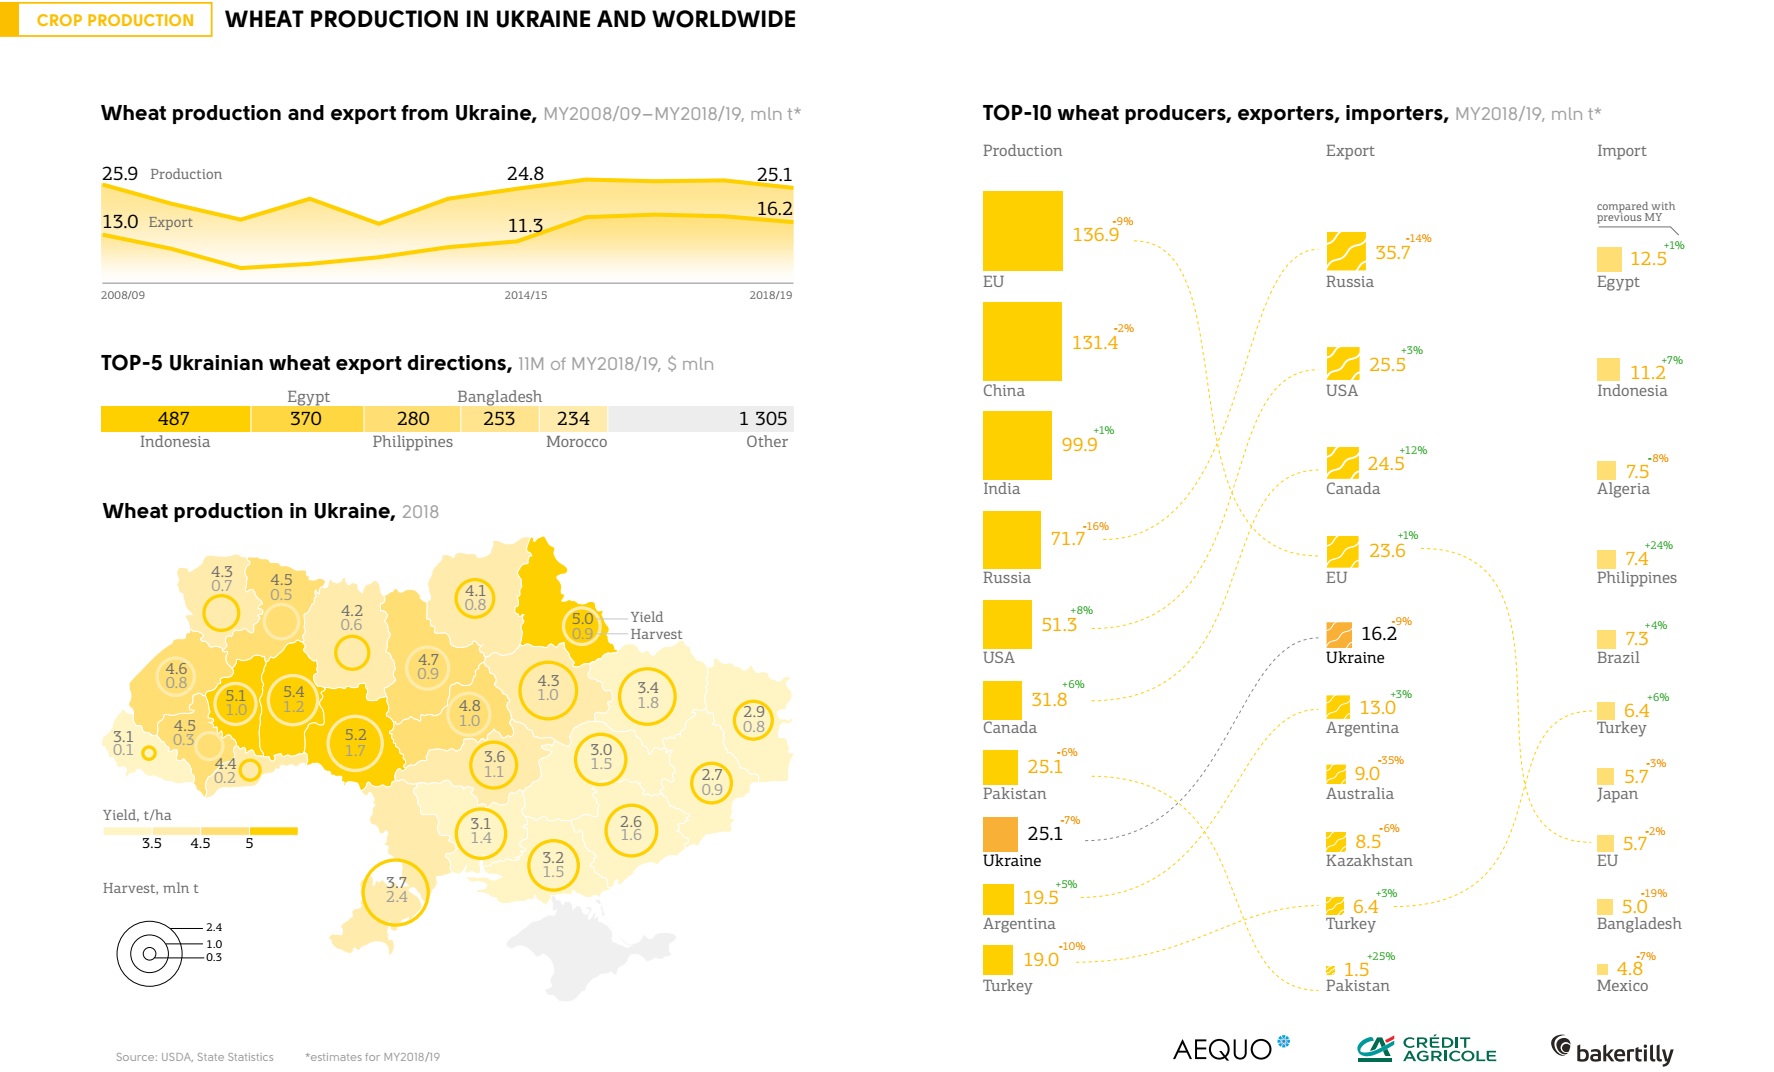 Wheat production in Ukraine and worldwide (click for full resolution)